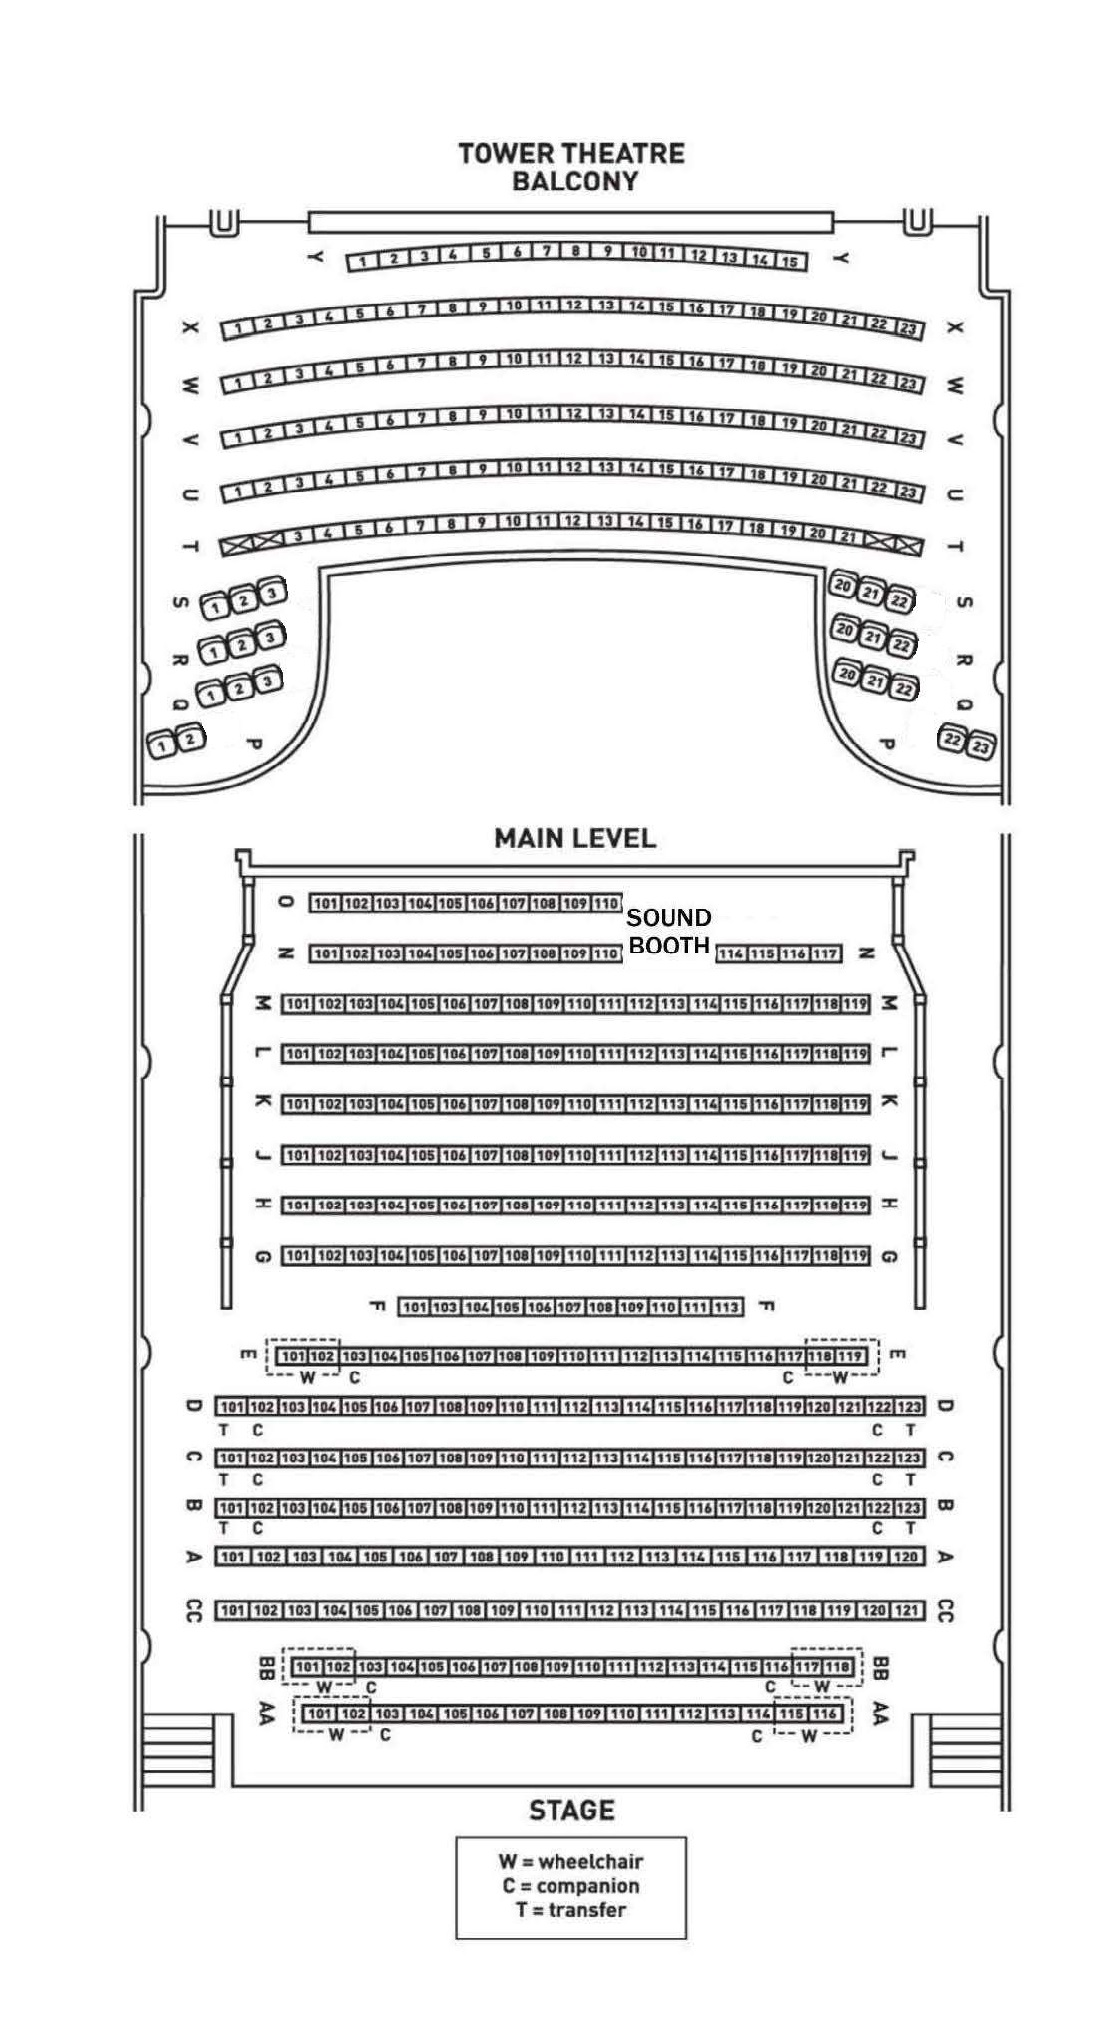 Updated Seating Chart 2.png